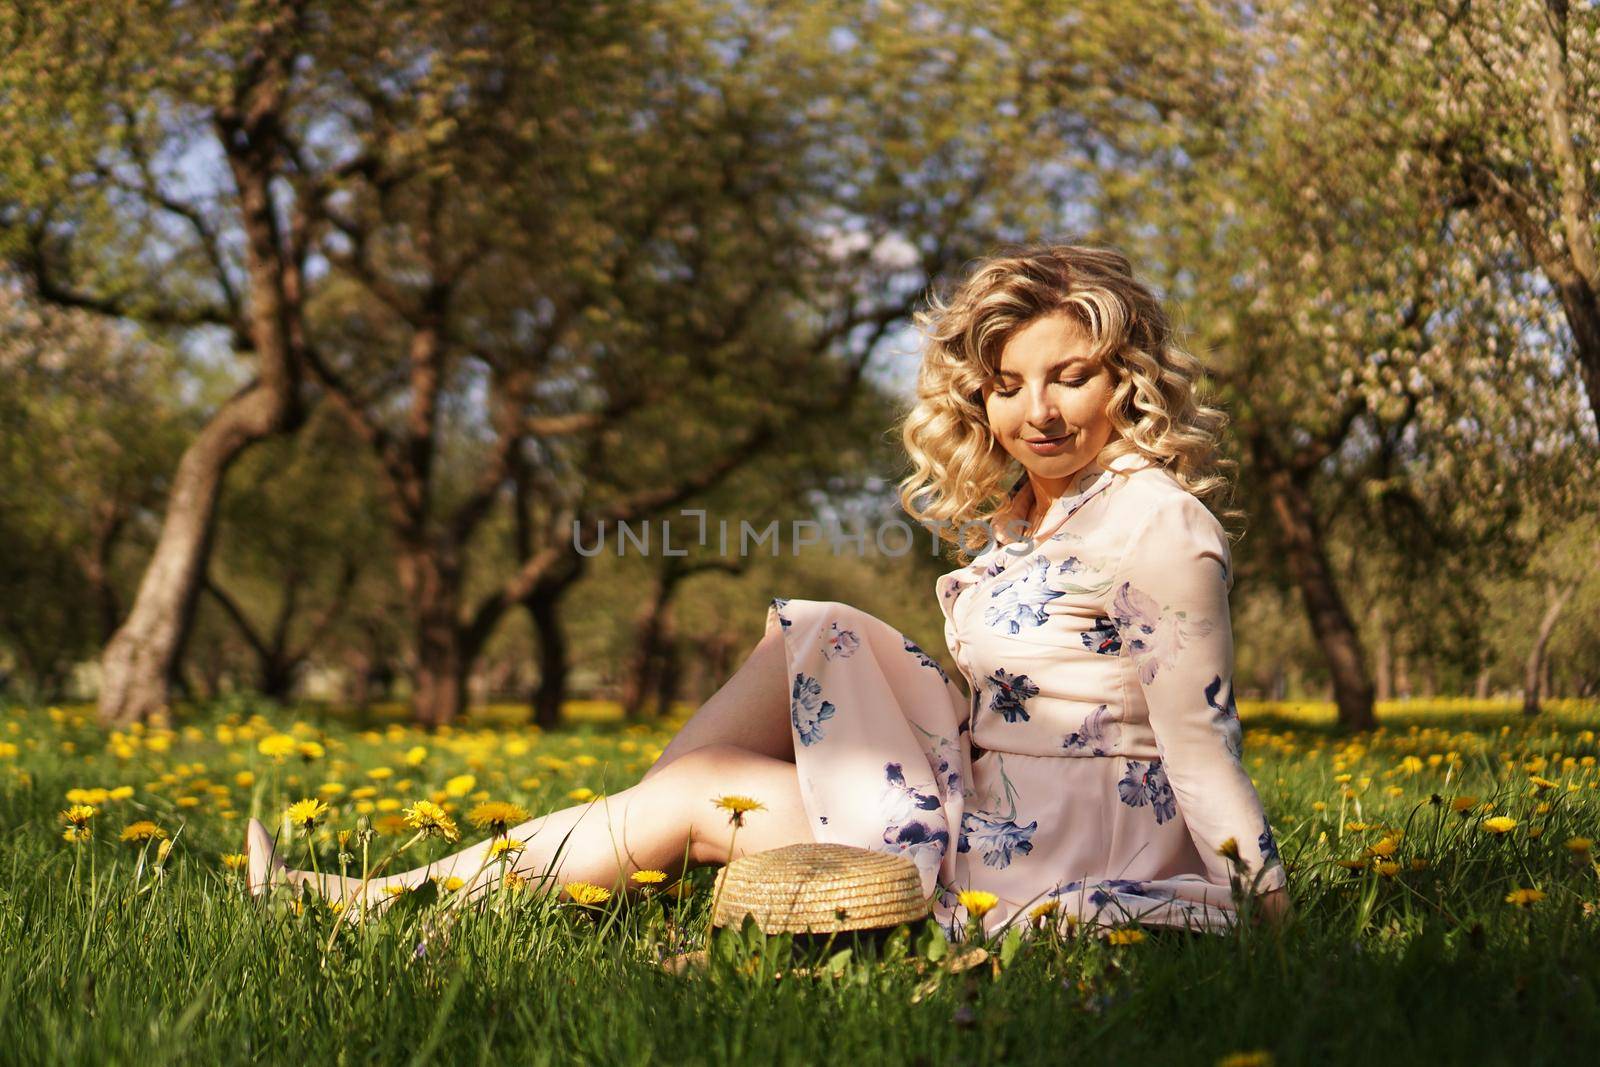 Cute woman rest in the green summer park with dandelions